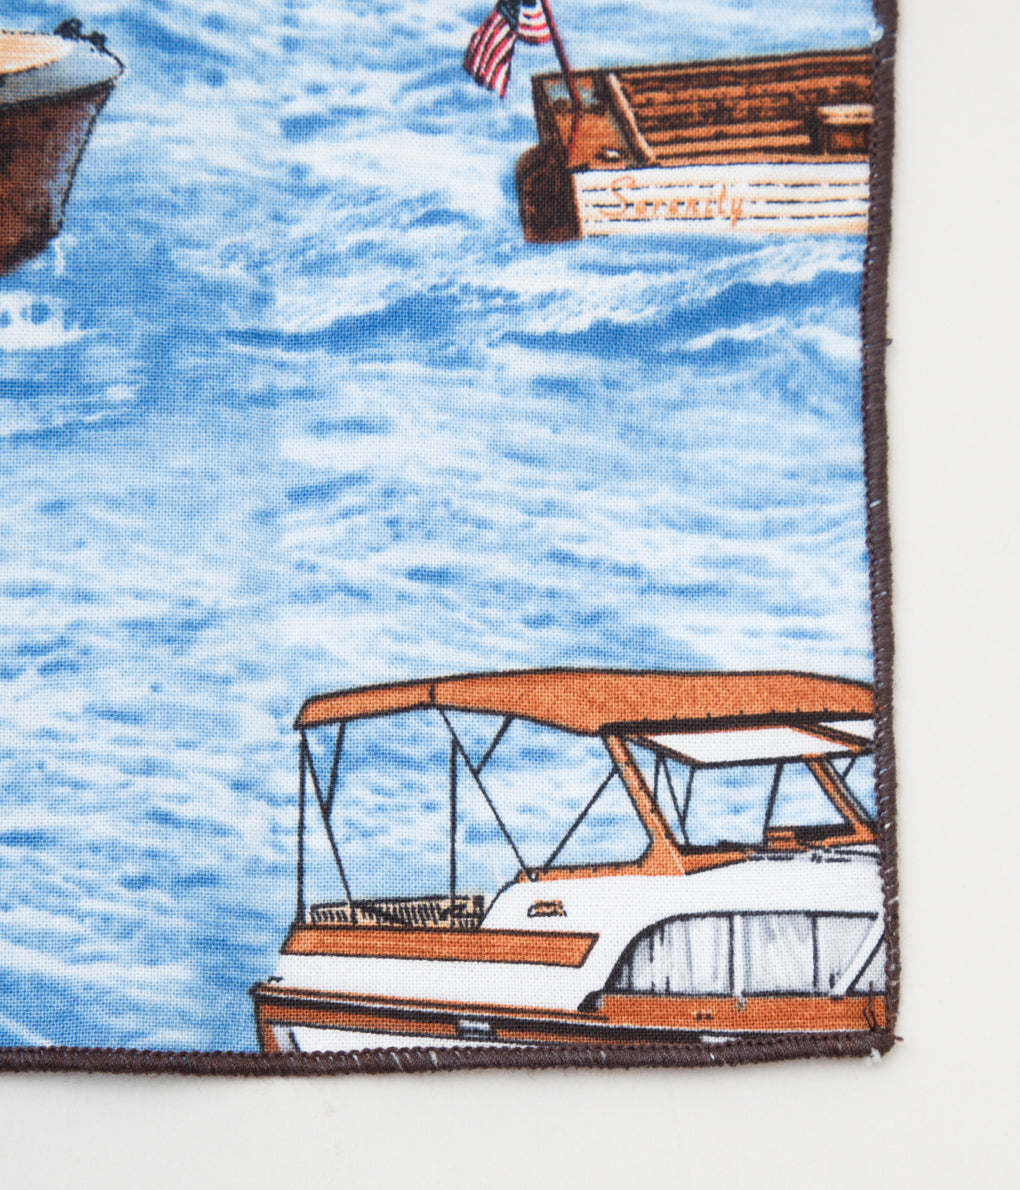 FINE AND DANDY "POCKET SQUARES" (BOATING PANELLED)